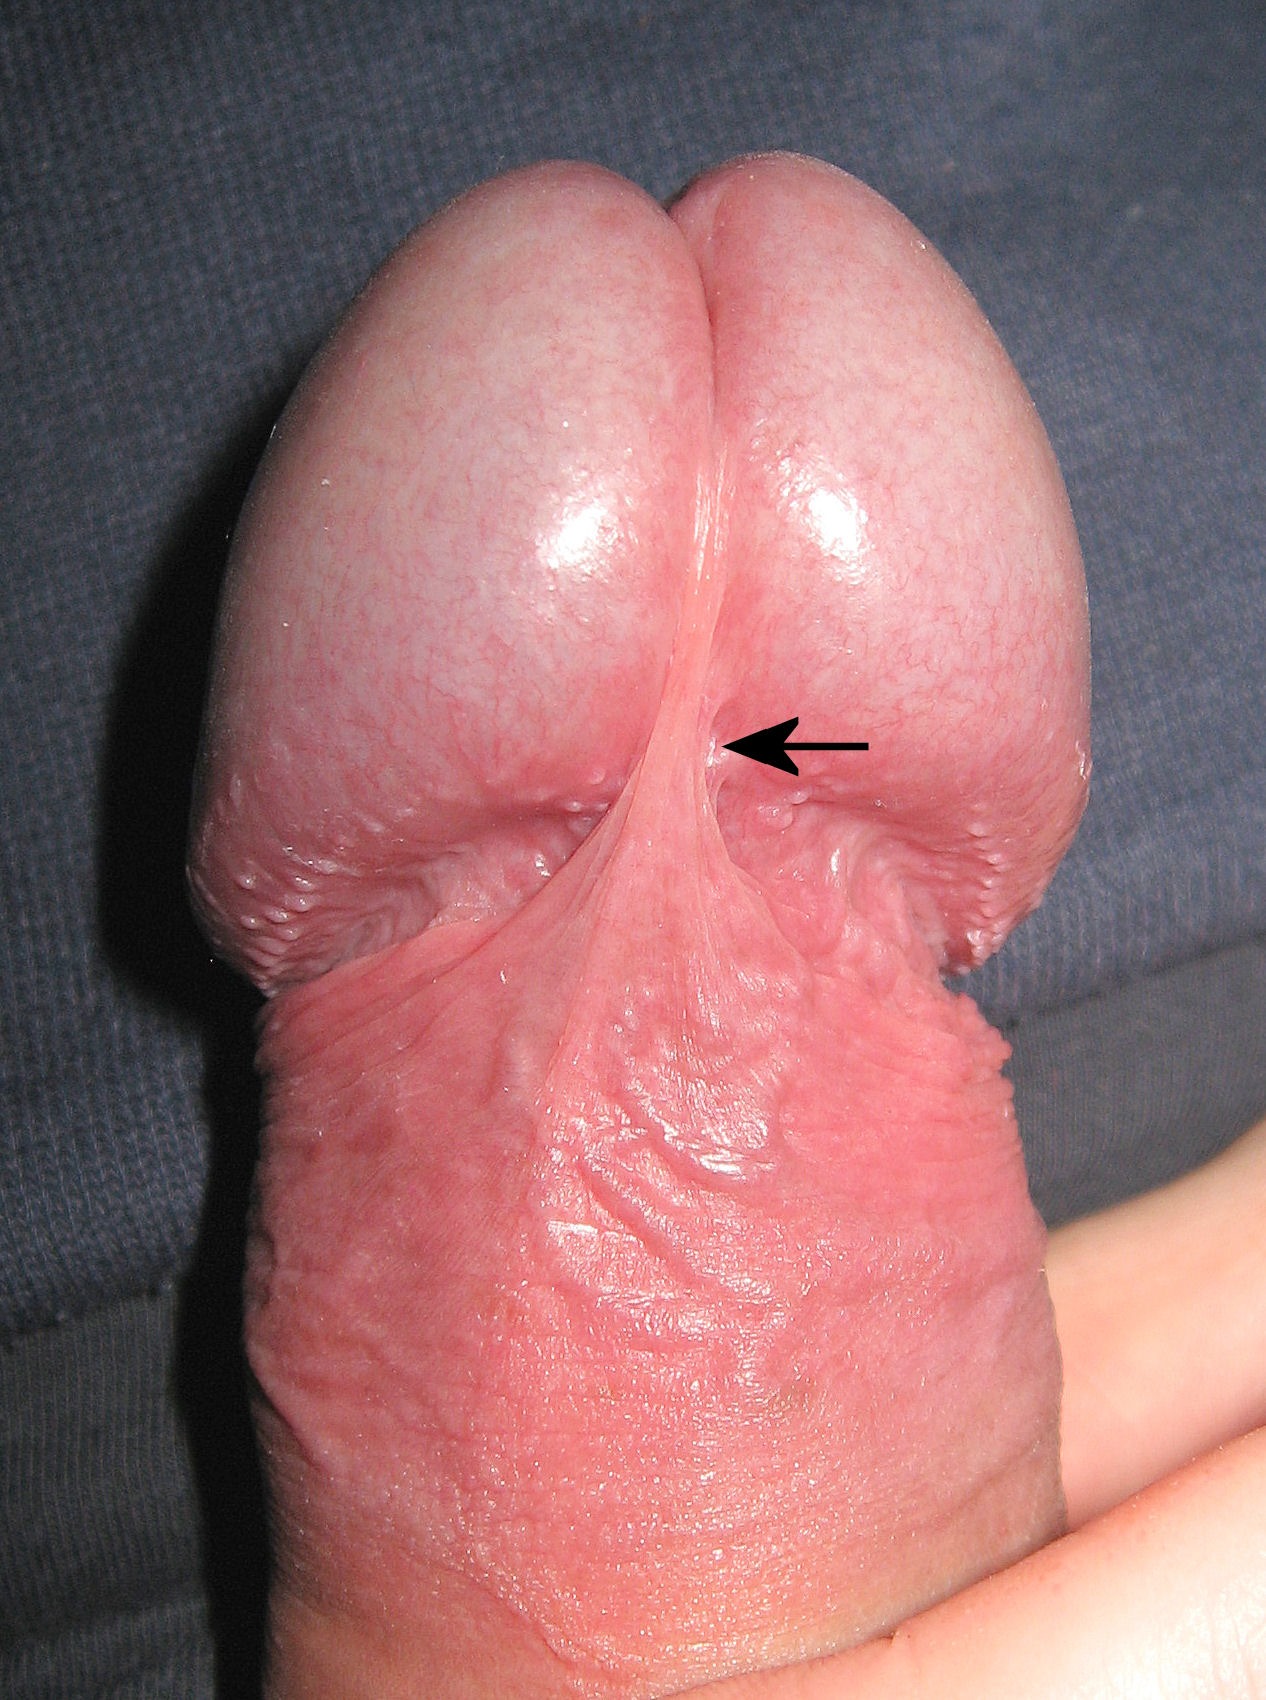 View of ventral side of glans penis showing an intact frenulum